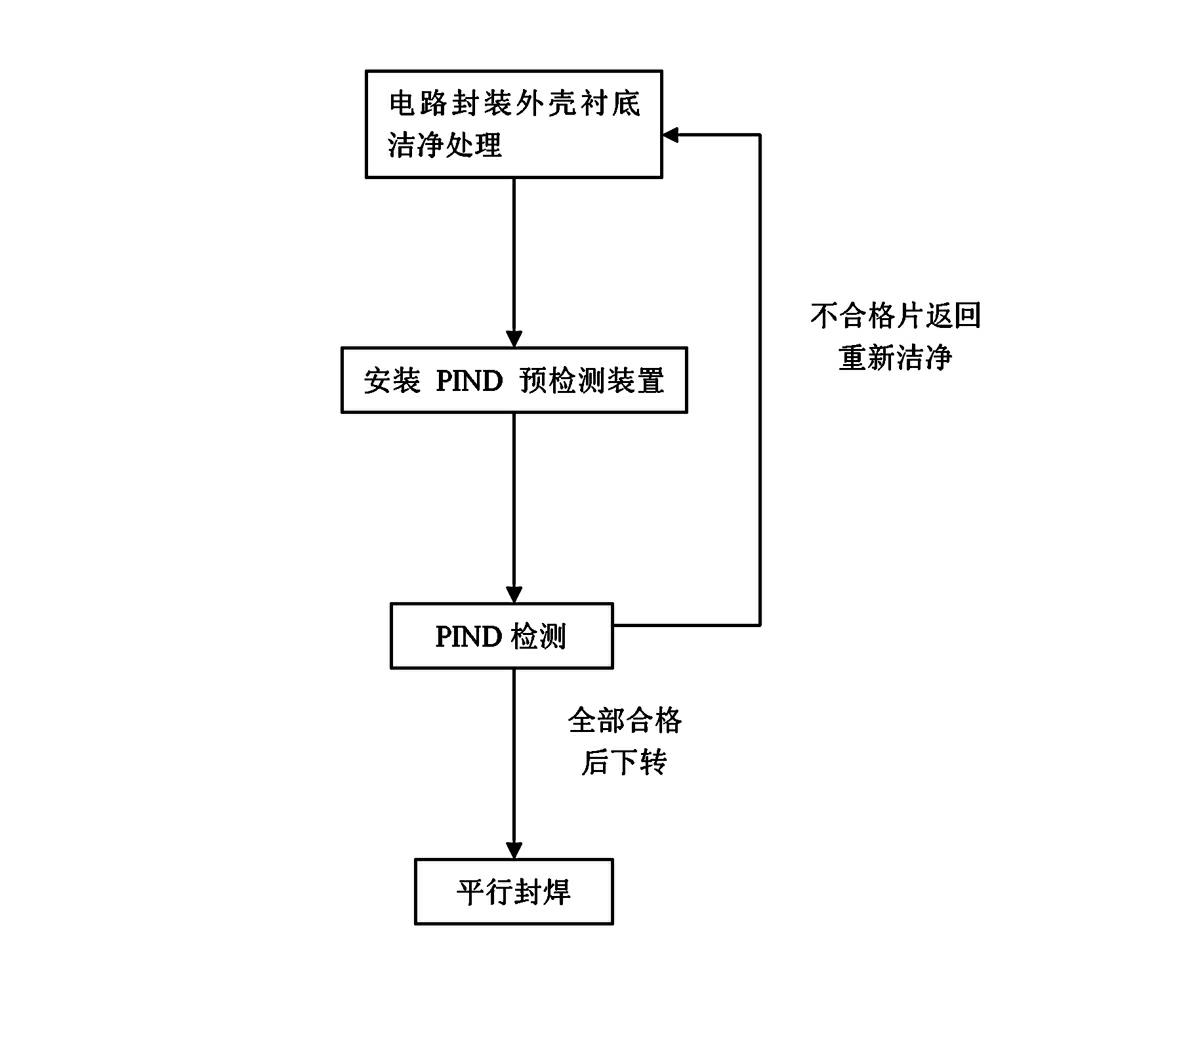 Method and device for pre-detecting of particle impact noise detection (PIND)